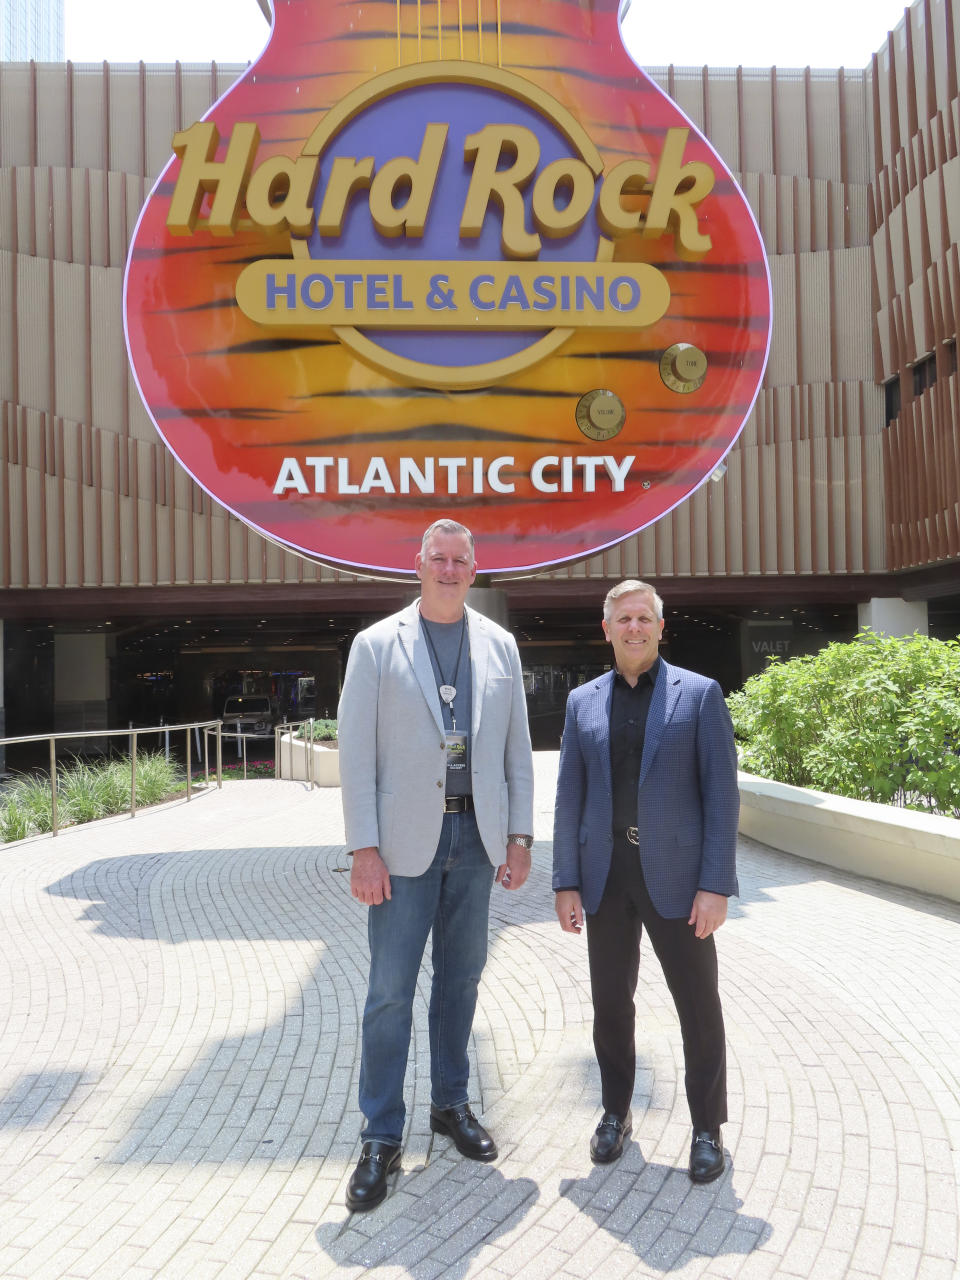 Mike Sampson, general manager of the Hard Rock casino, left, and George Goldhoff, president of the casino, right, pose in front of the casino's guitar statue in Atlantic City, N.J., on June 15, 2023. The city's two newest casinos - Hard Rock and Ocean - which both opened on June 27, 2018, have become the second and third most successful Atlantic City casinos in terms of money won from in-person gamblers. (AP Photo/Wayne Parry)